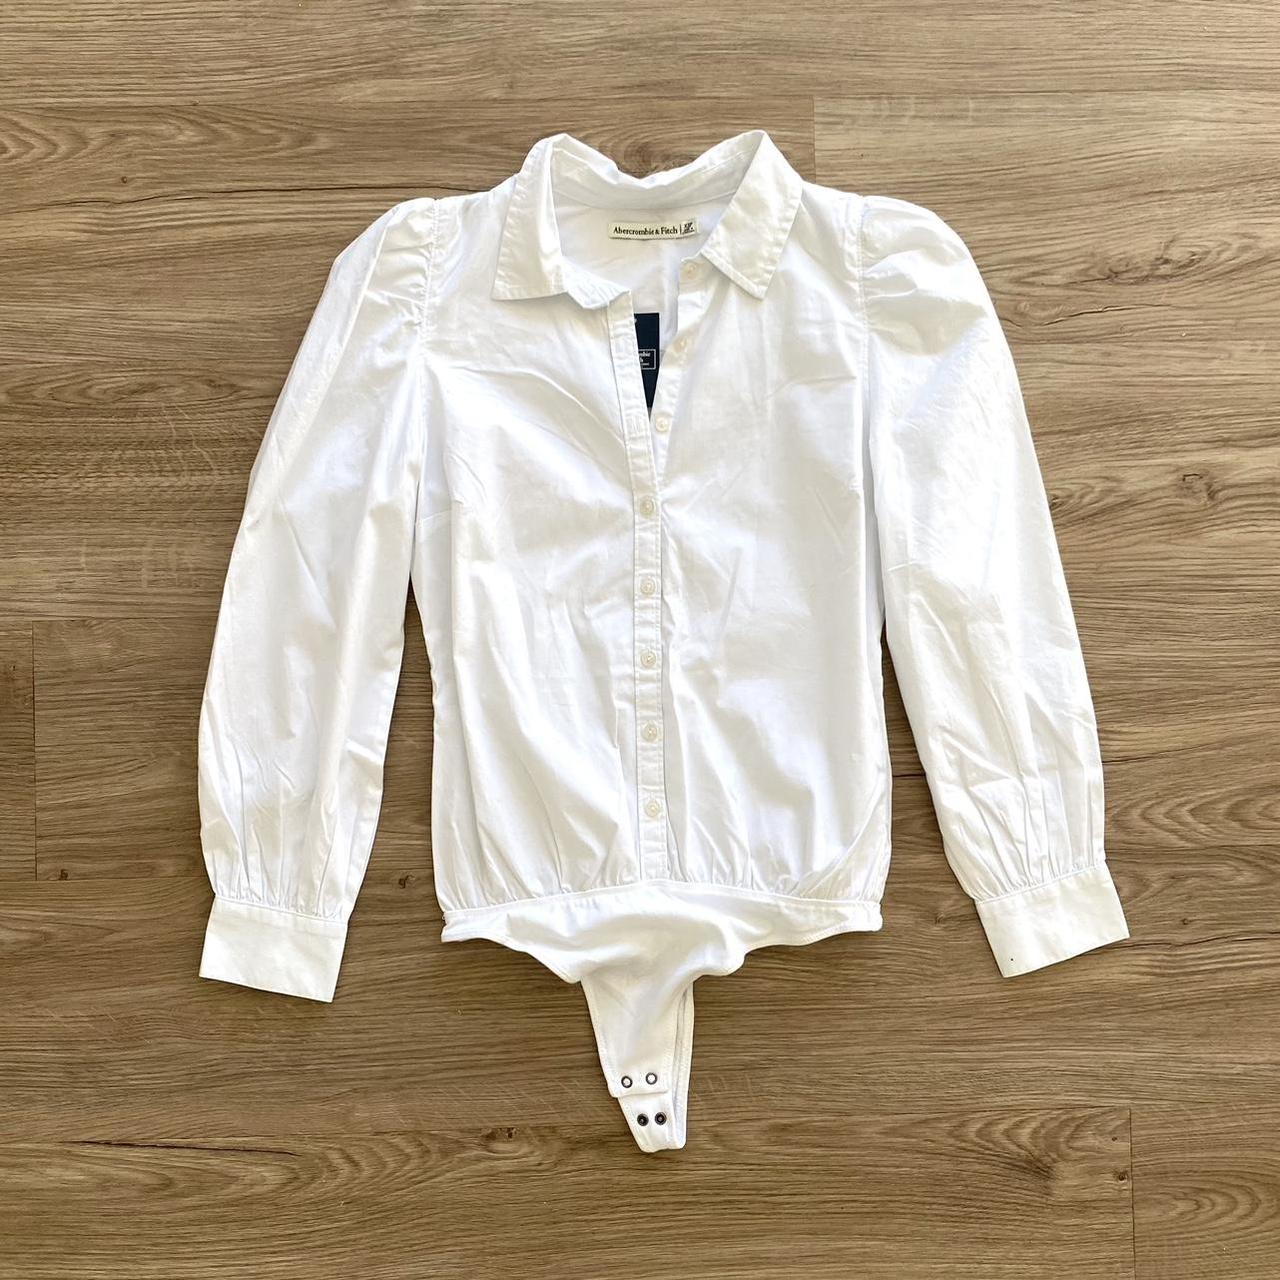 Abercrombie & Fitch Women's Blouse